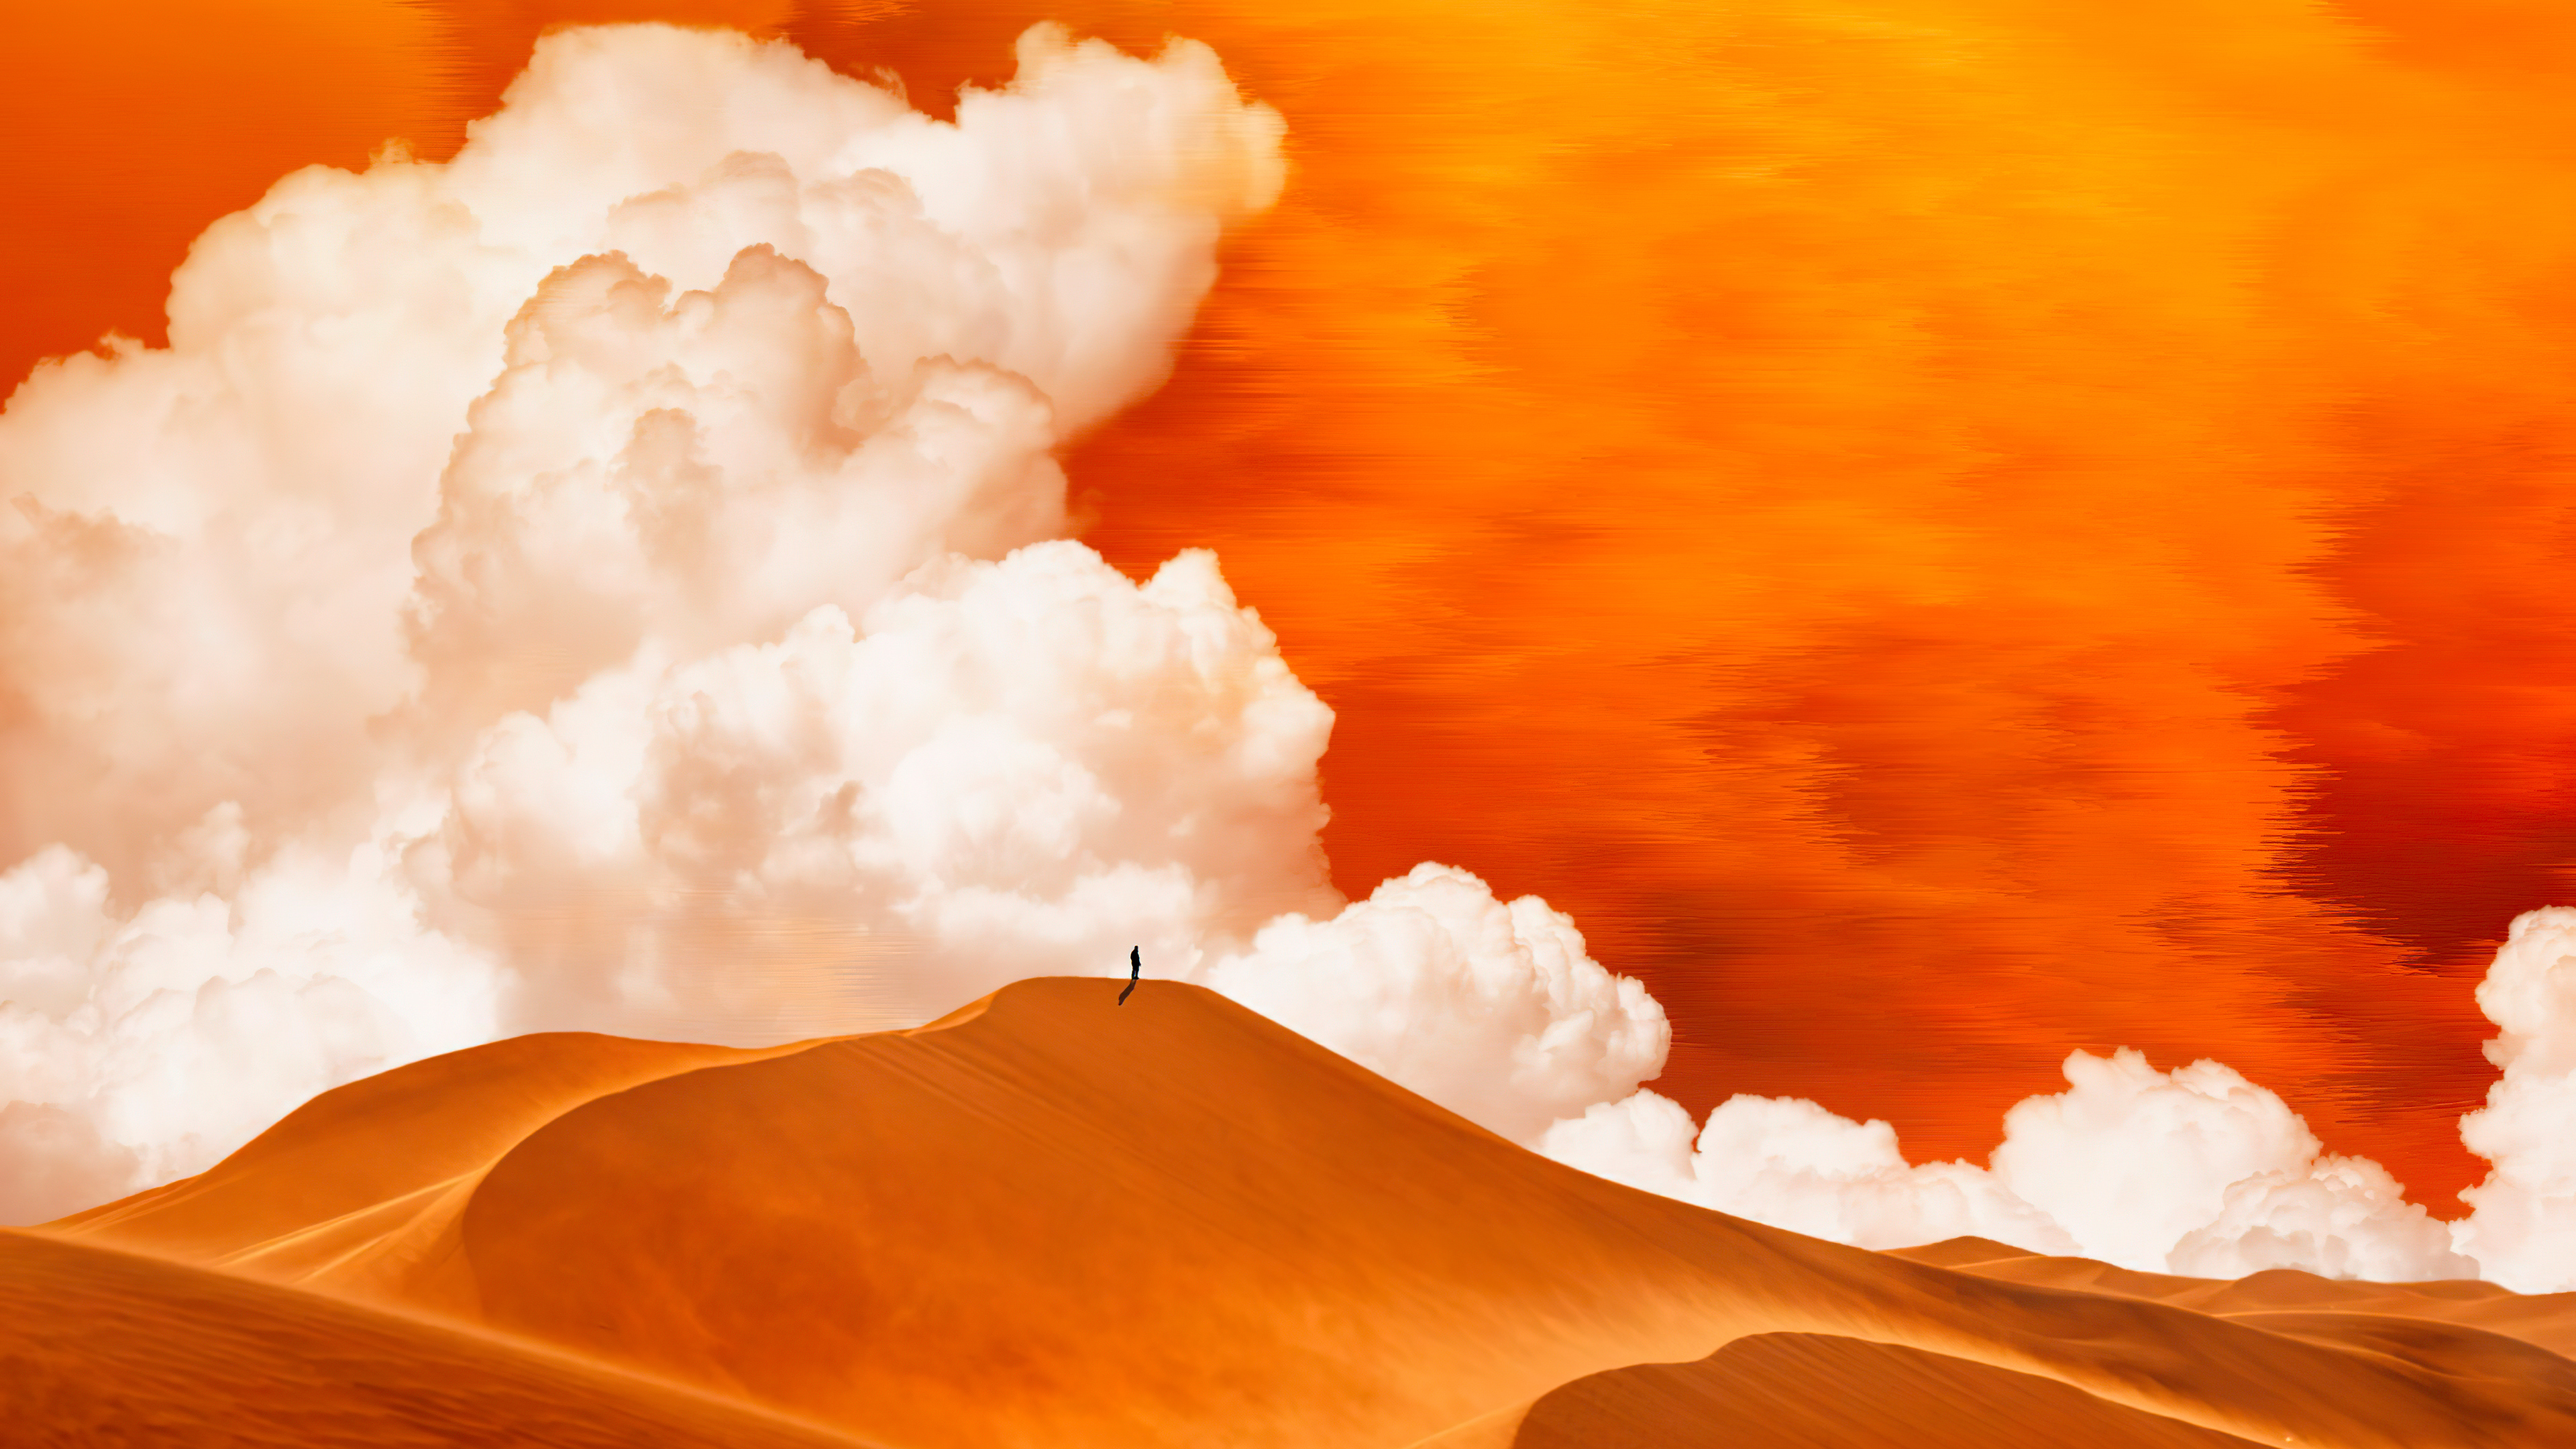 50 Dune 2021 HD Wallpapers and Backgrounds